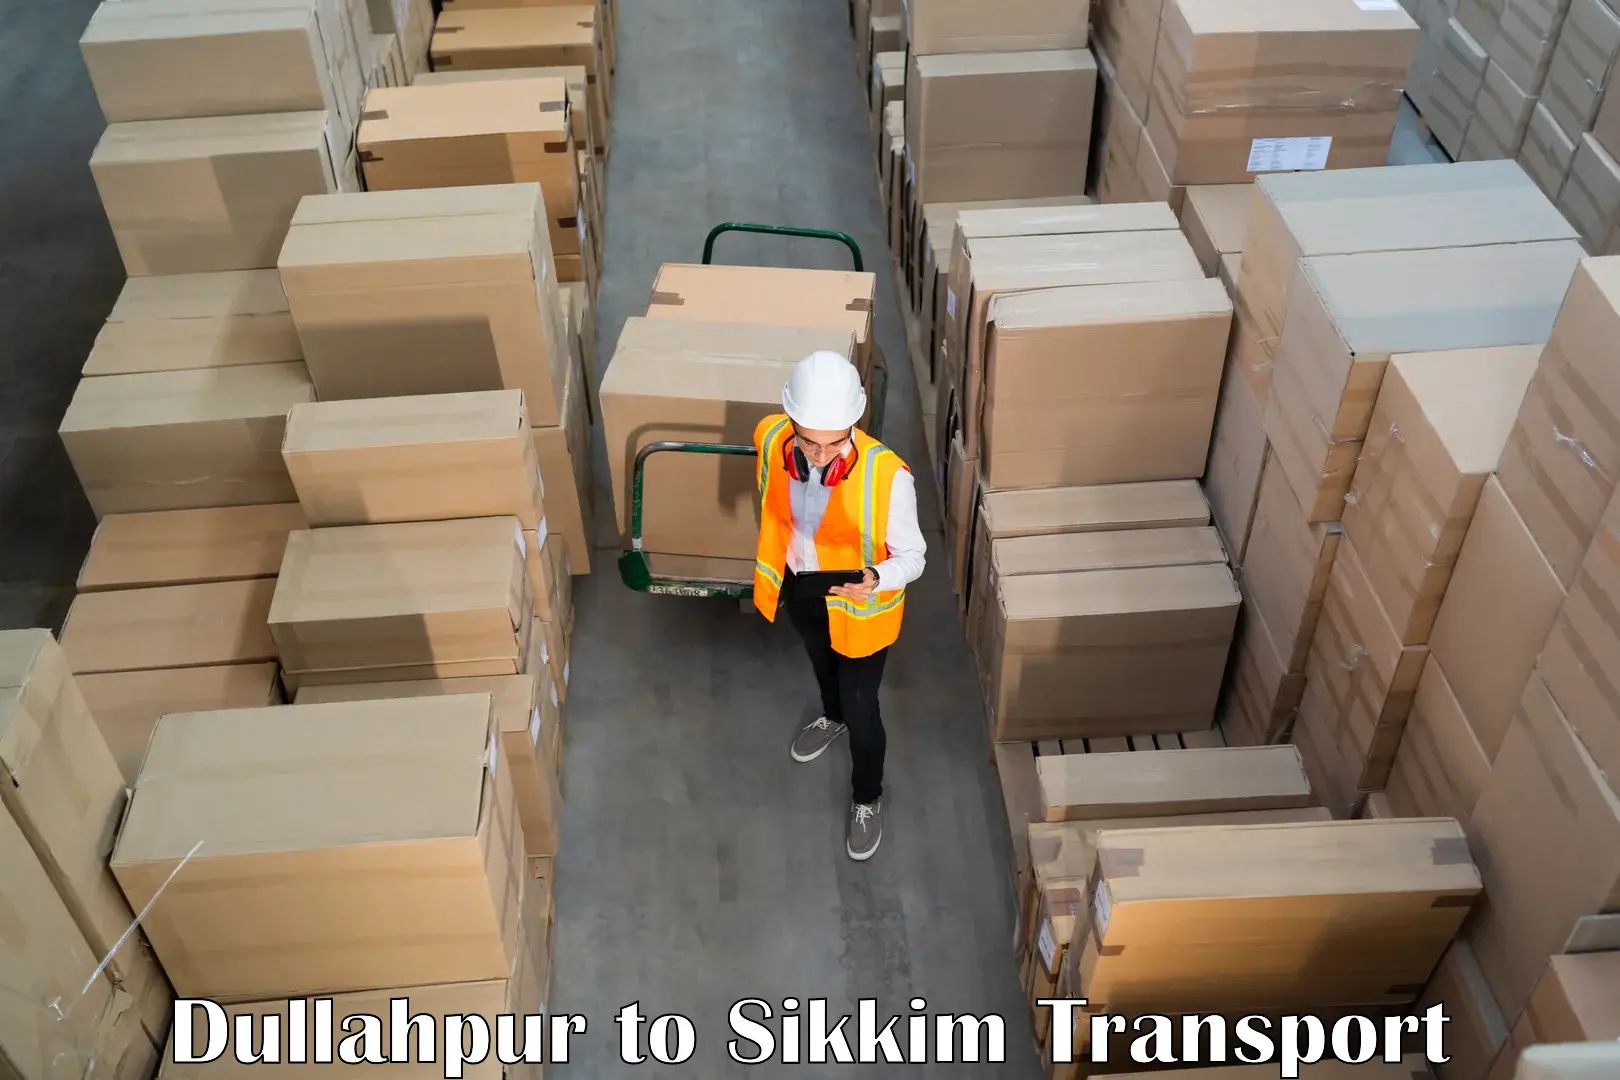 Shipping partner Dullahpur to North Sikkim